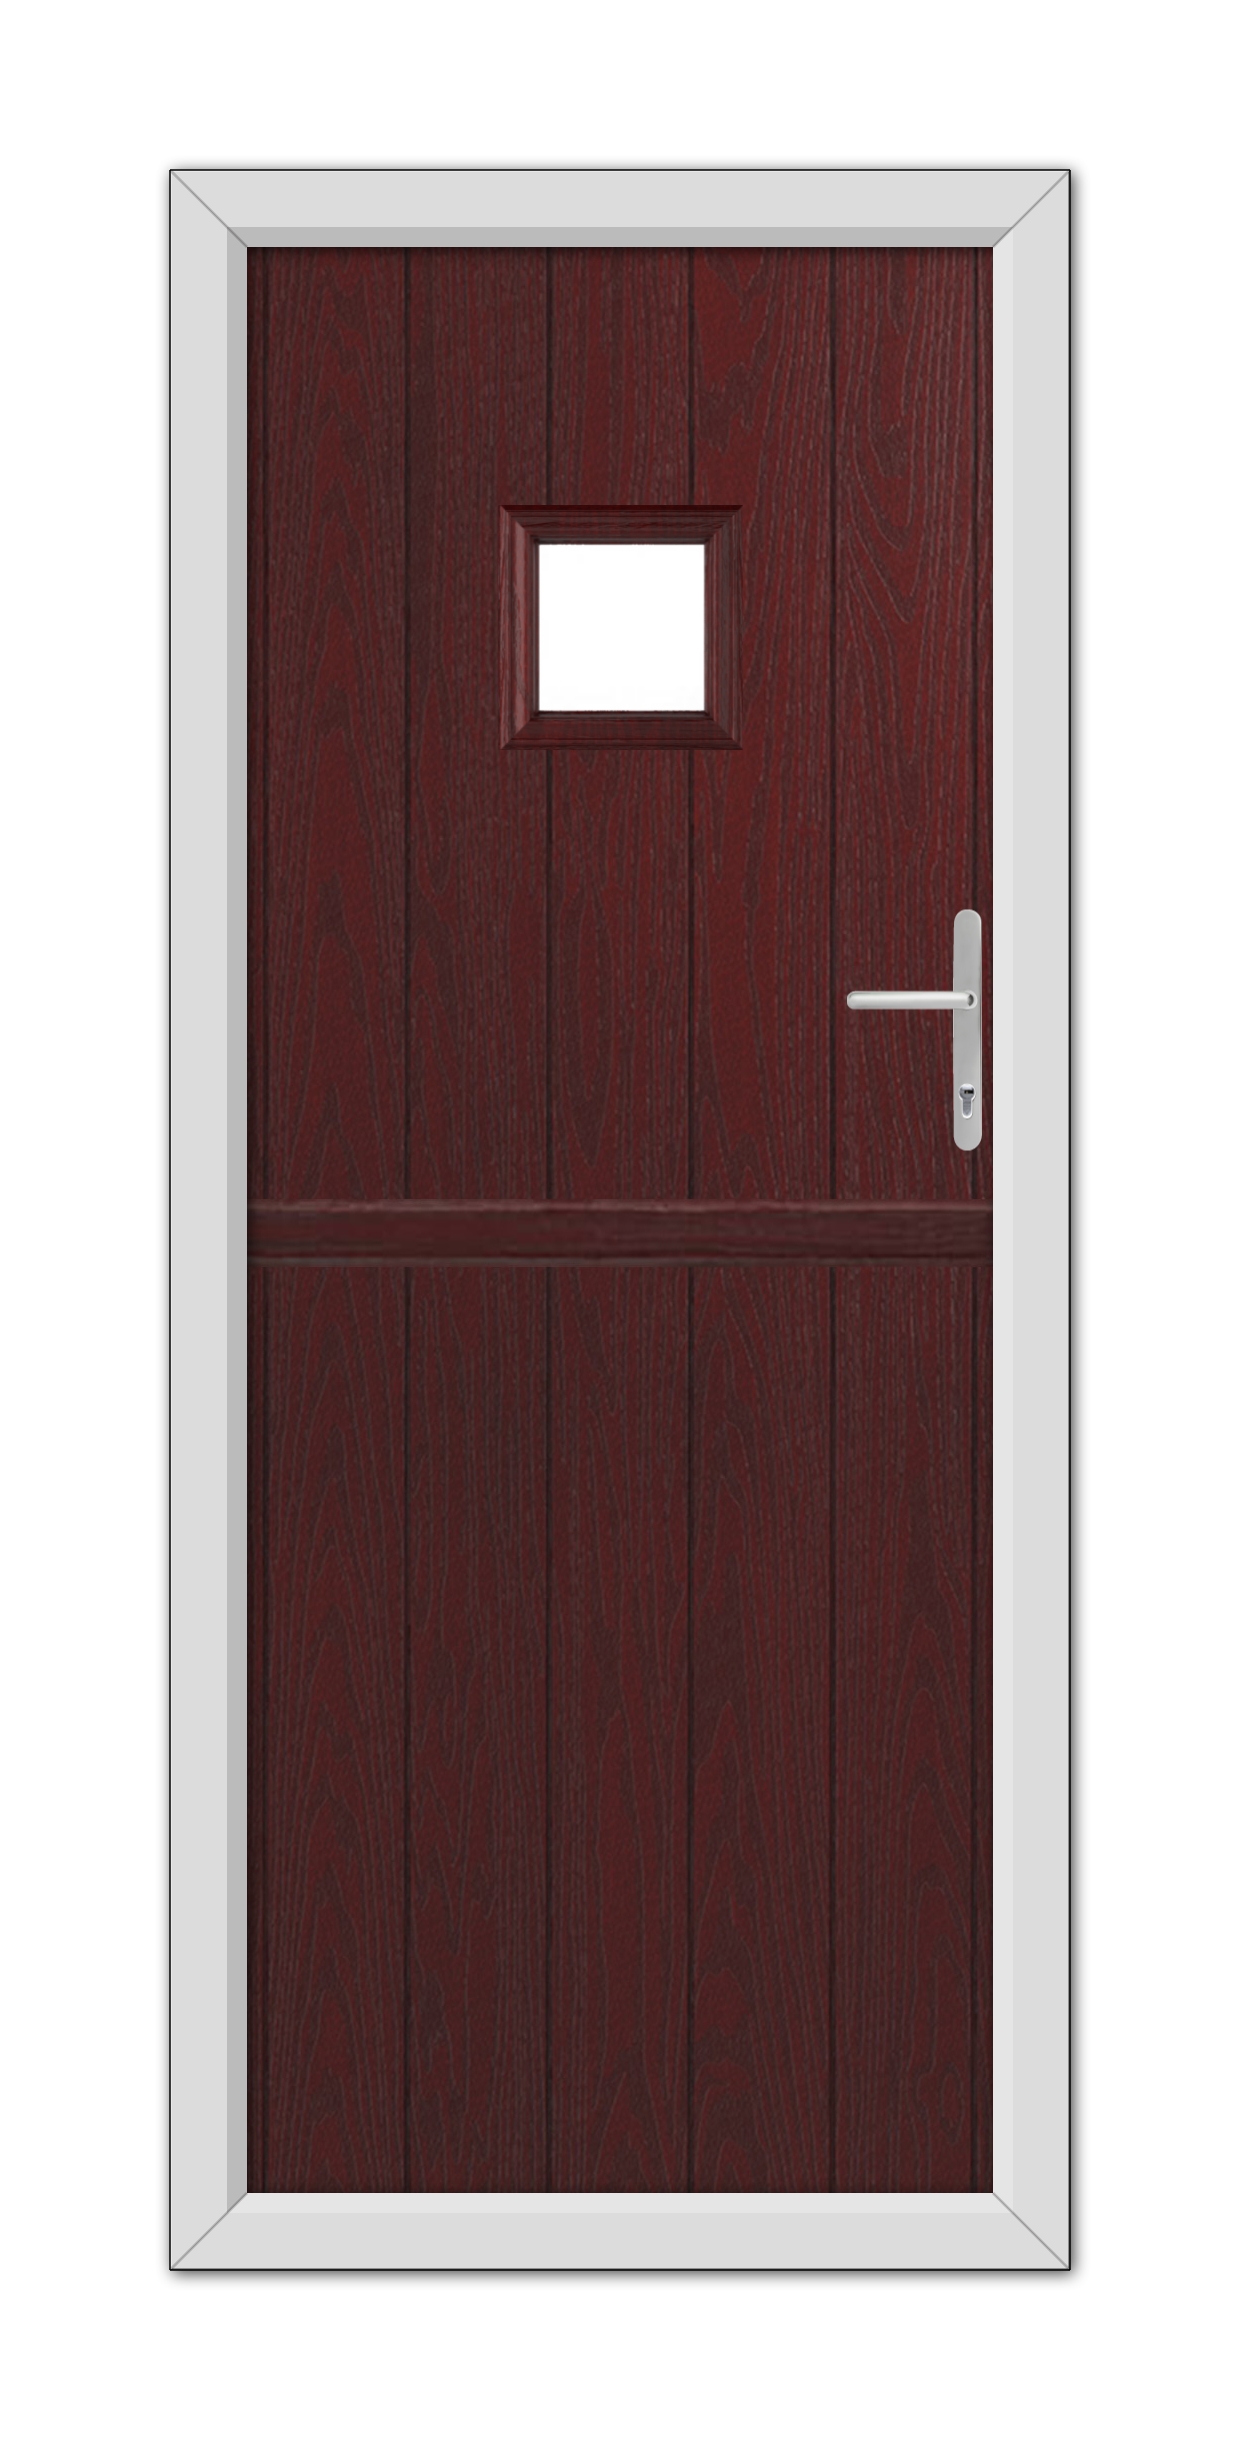 A modern Rosewood Brampton Stable Composite Door 48mm Timber Core with a small square window at the top and a white metal handle on the right side, framed in white.